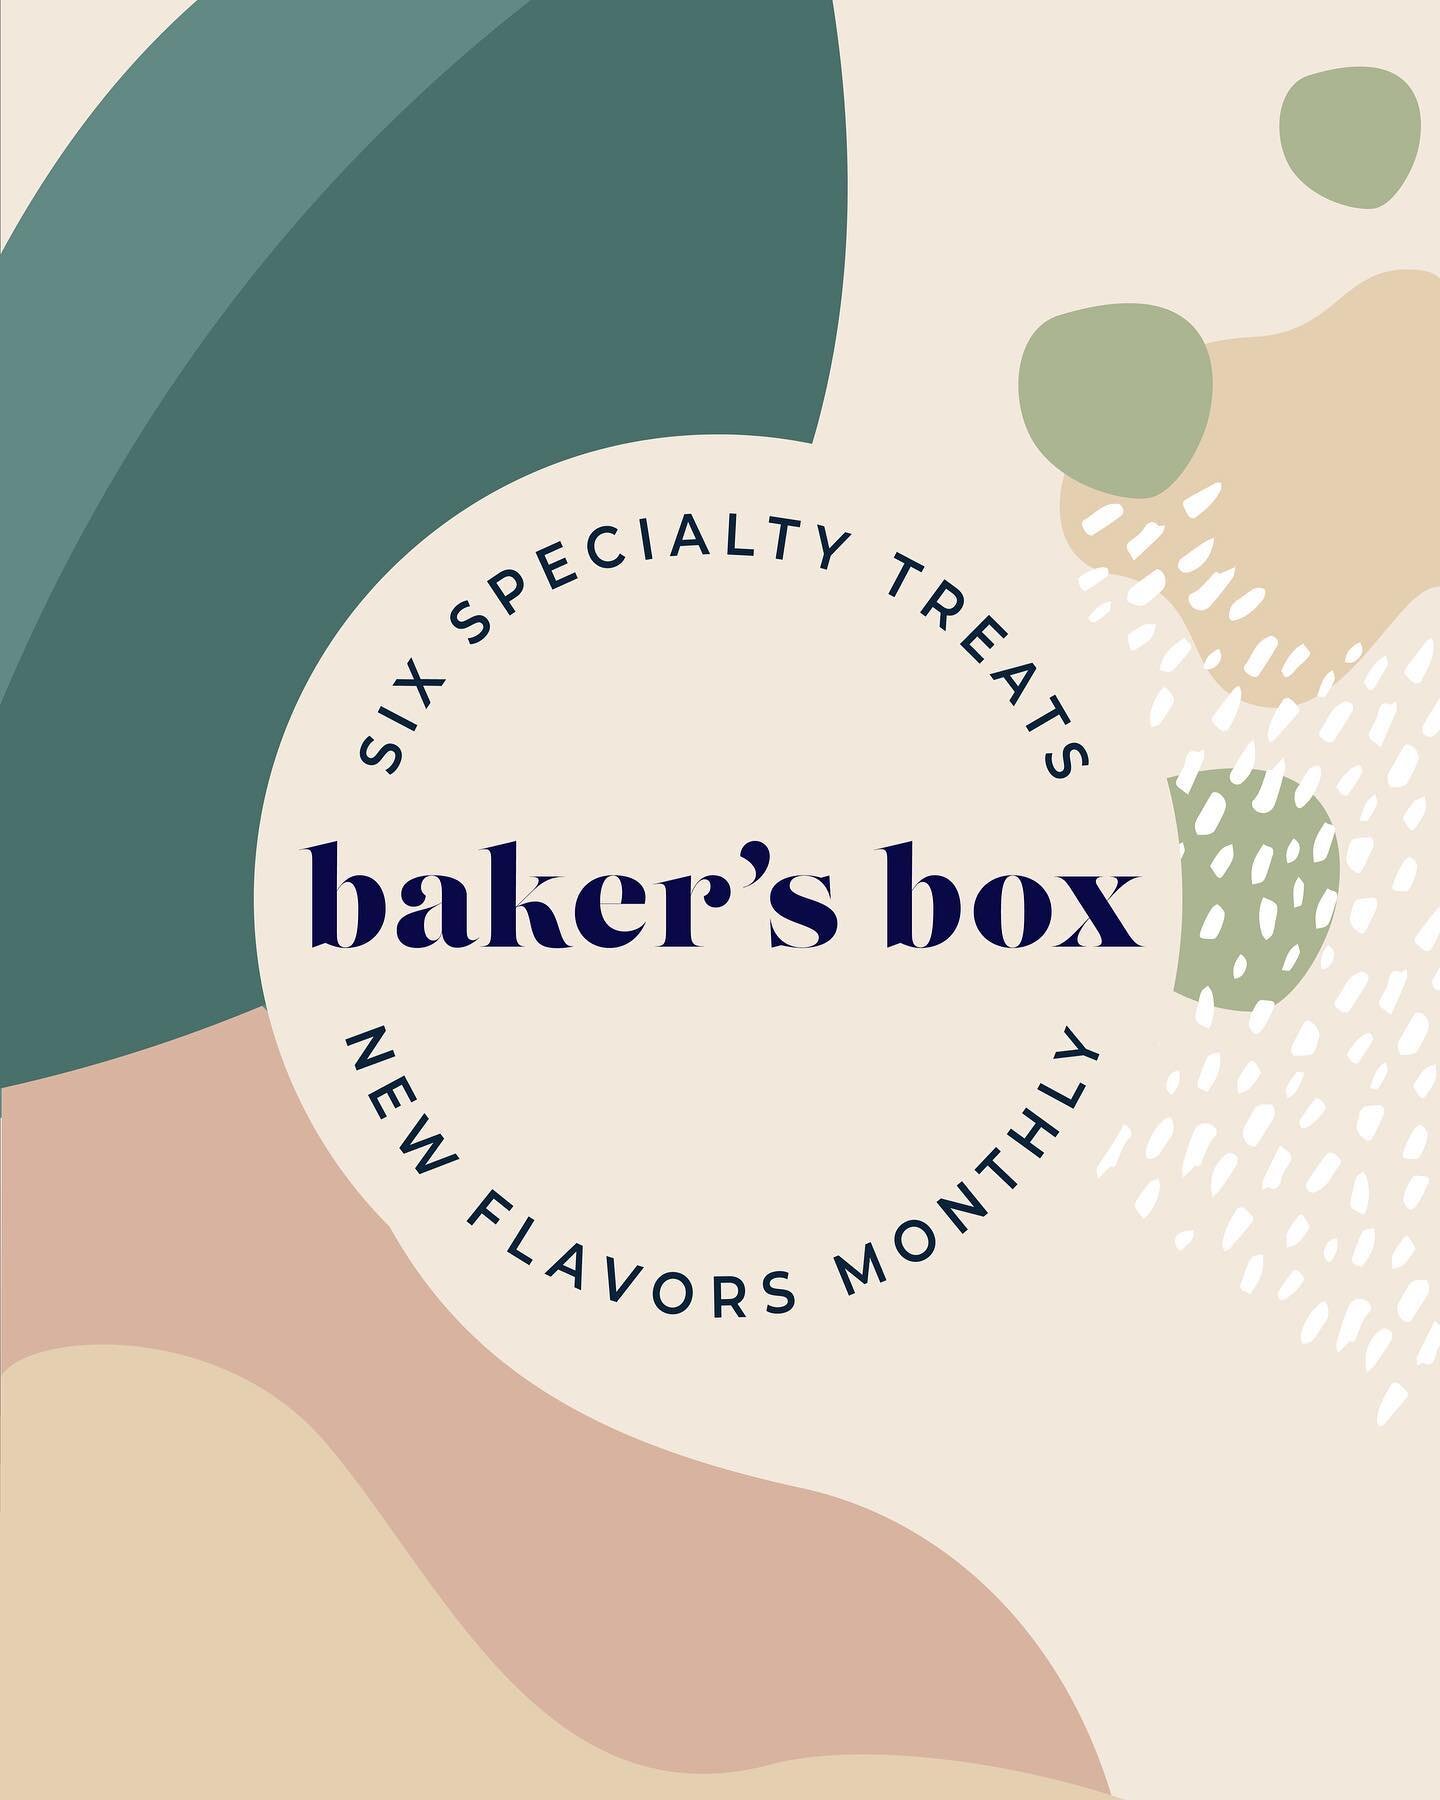 Is it just us, or choosing one item from the dessert menu is just too difficult?! Well, that&rsquo;s why we came up with ✨The Baker&rsquo;s Box✨ 

Six unique and delicious treats, available weekly, with fresh new flavors every single month🍊🍓🍋🍉🍍
